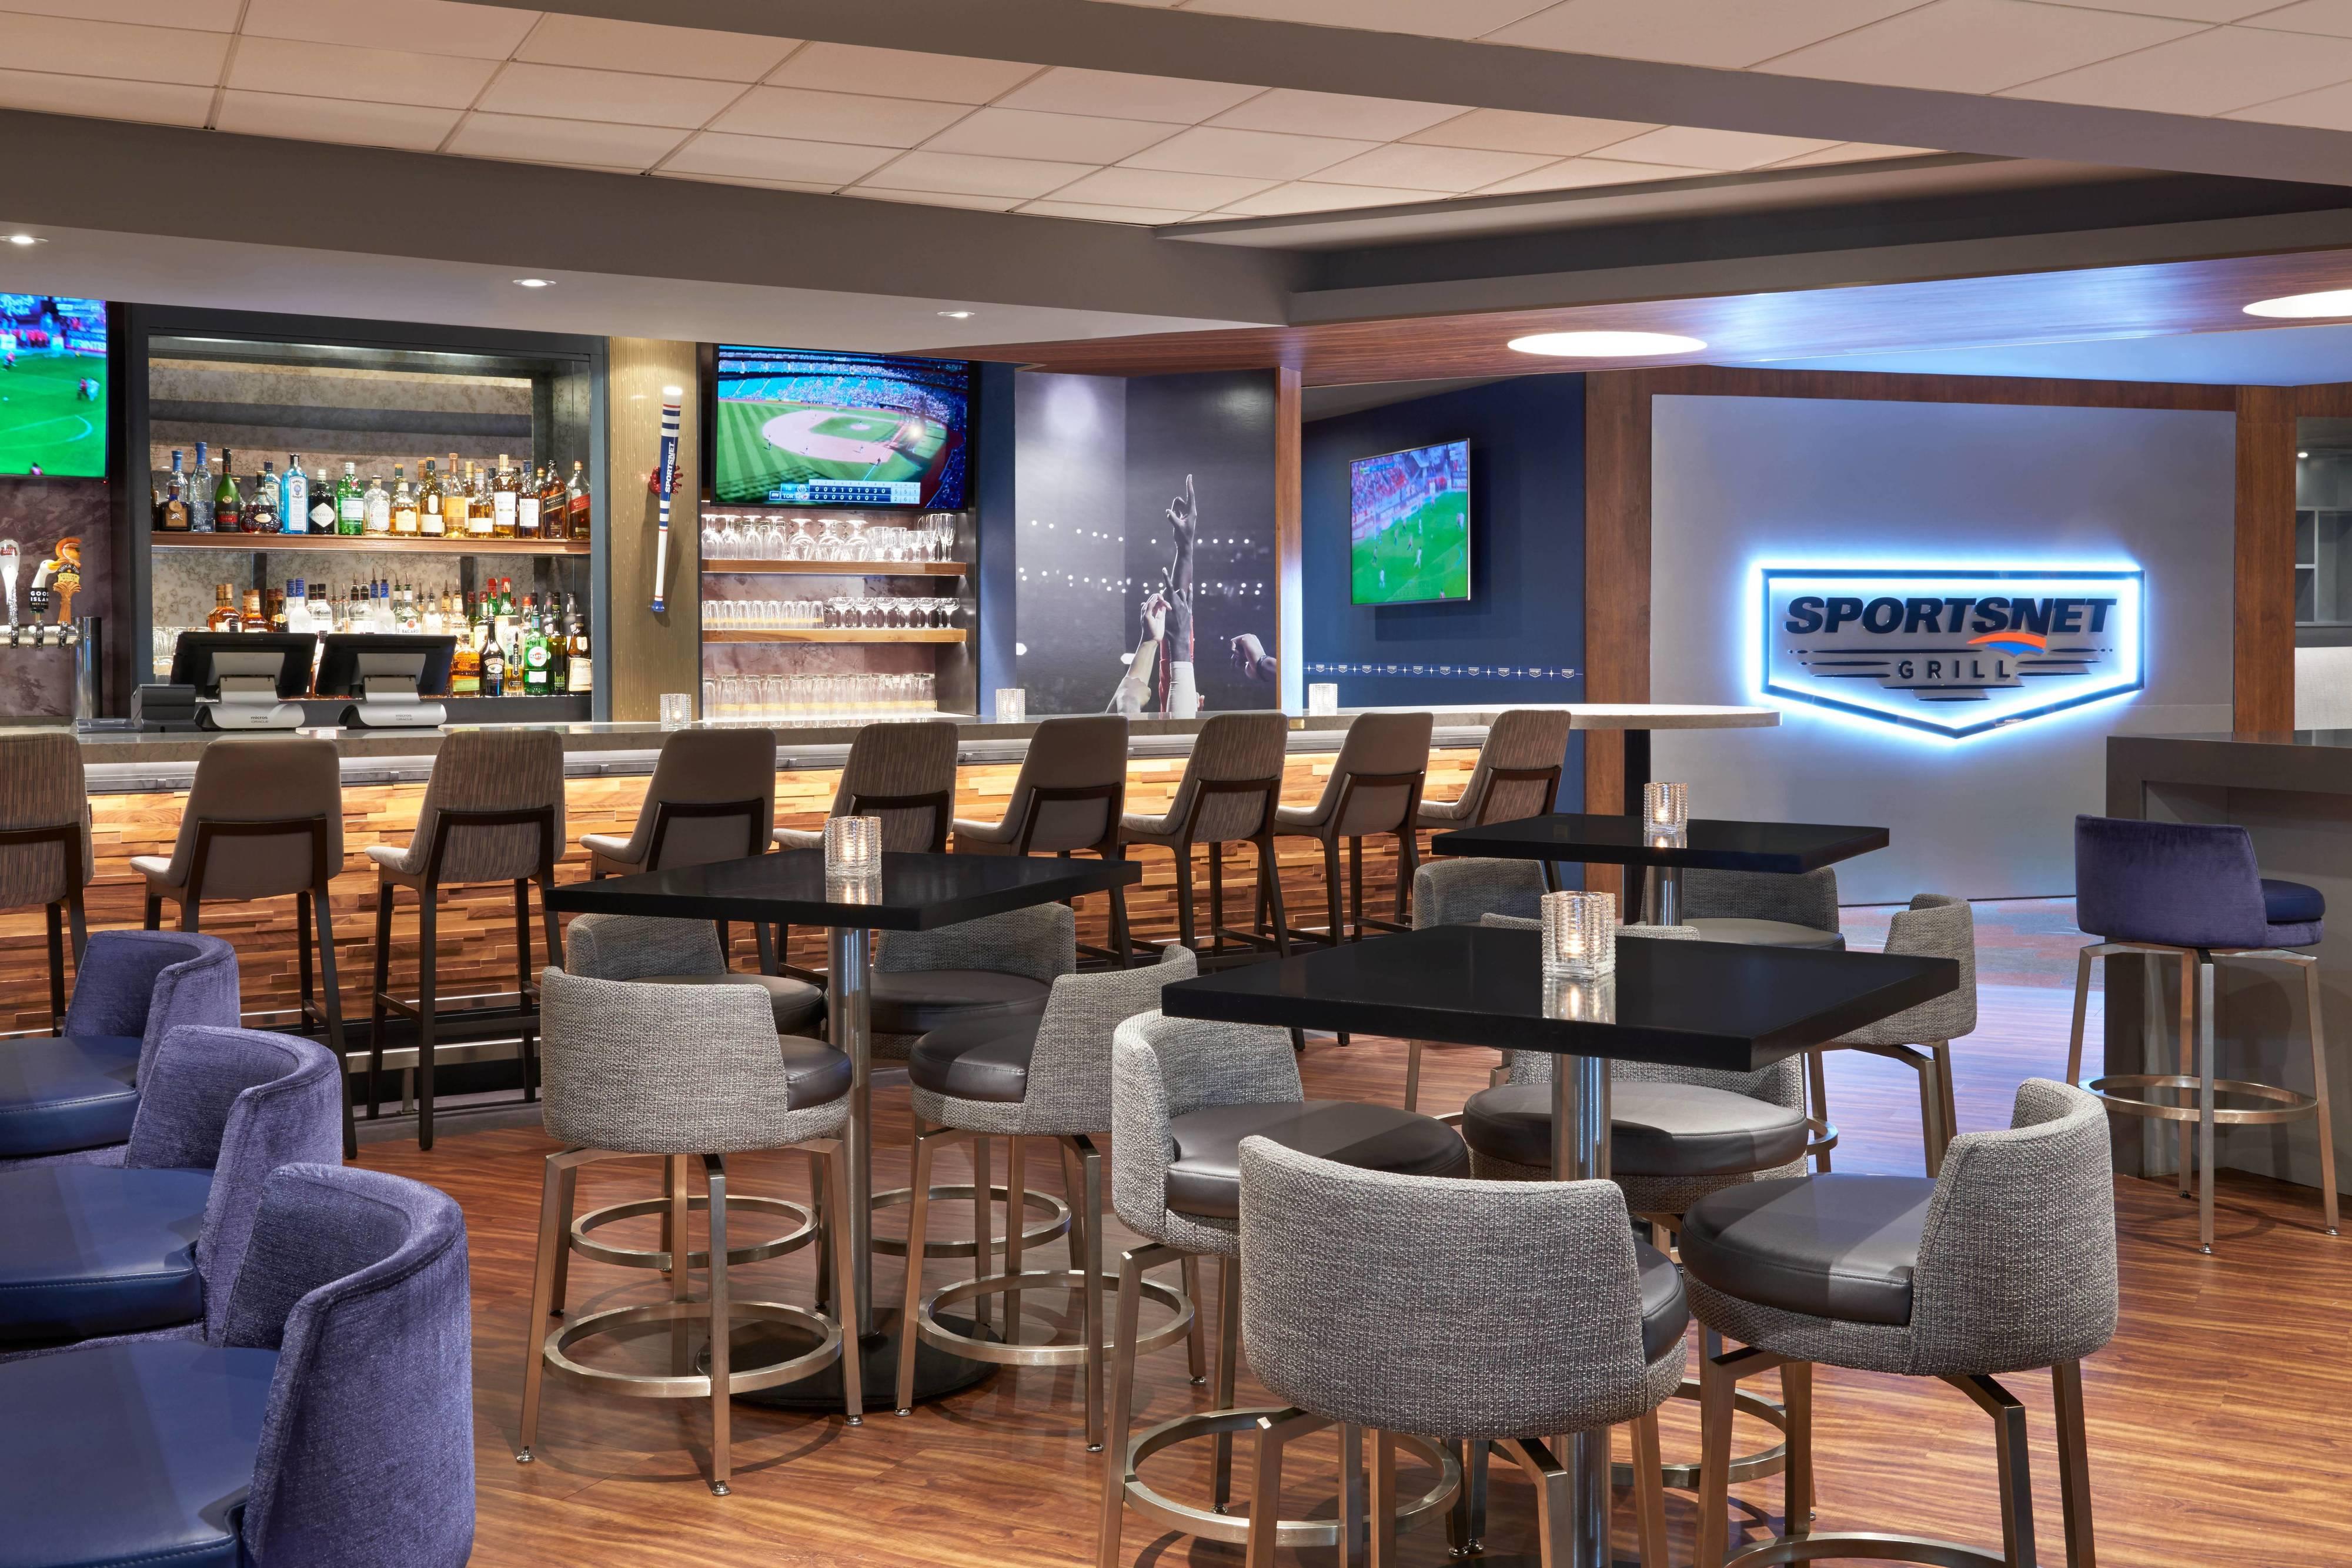 Sportsnet Grill with 16 big screen TVs